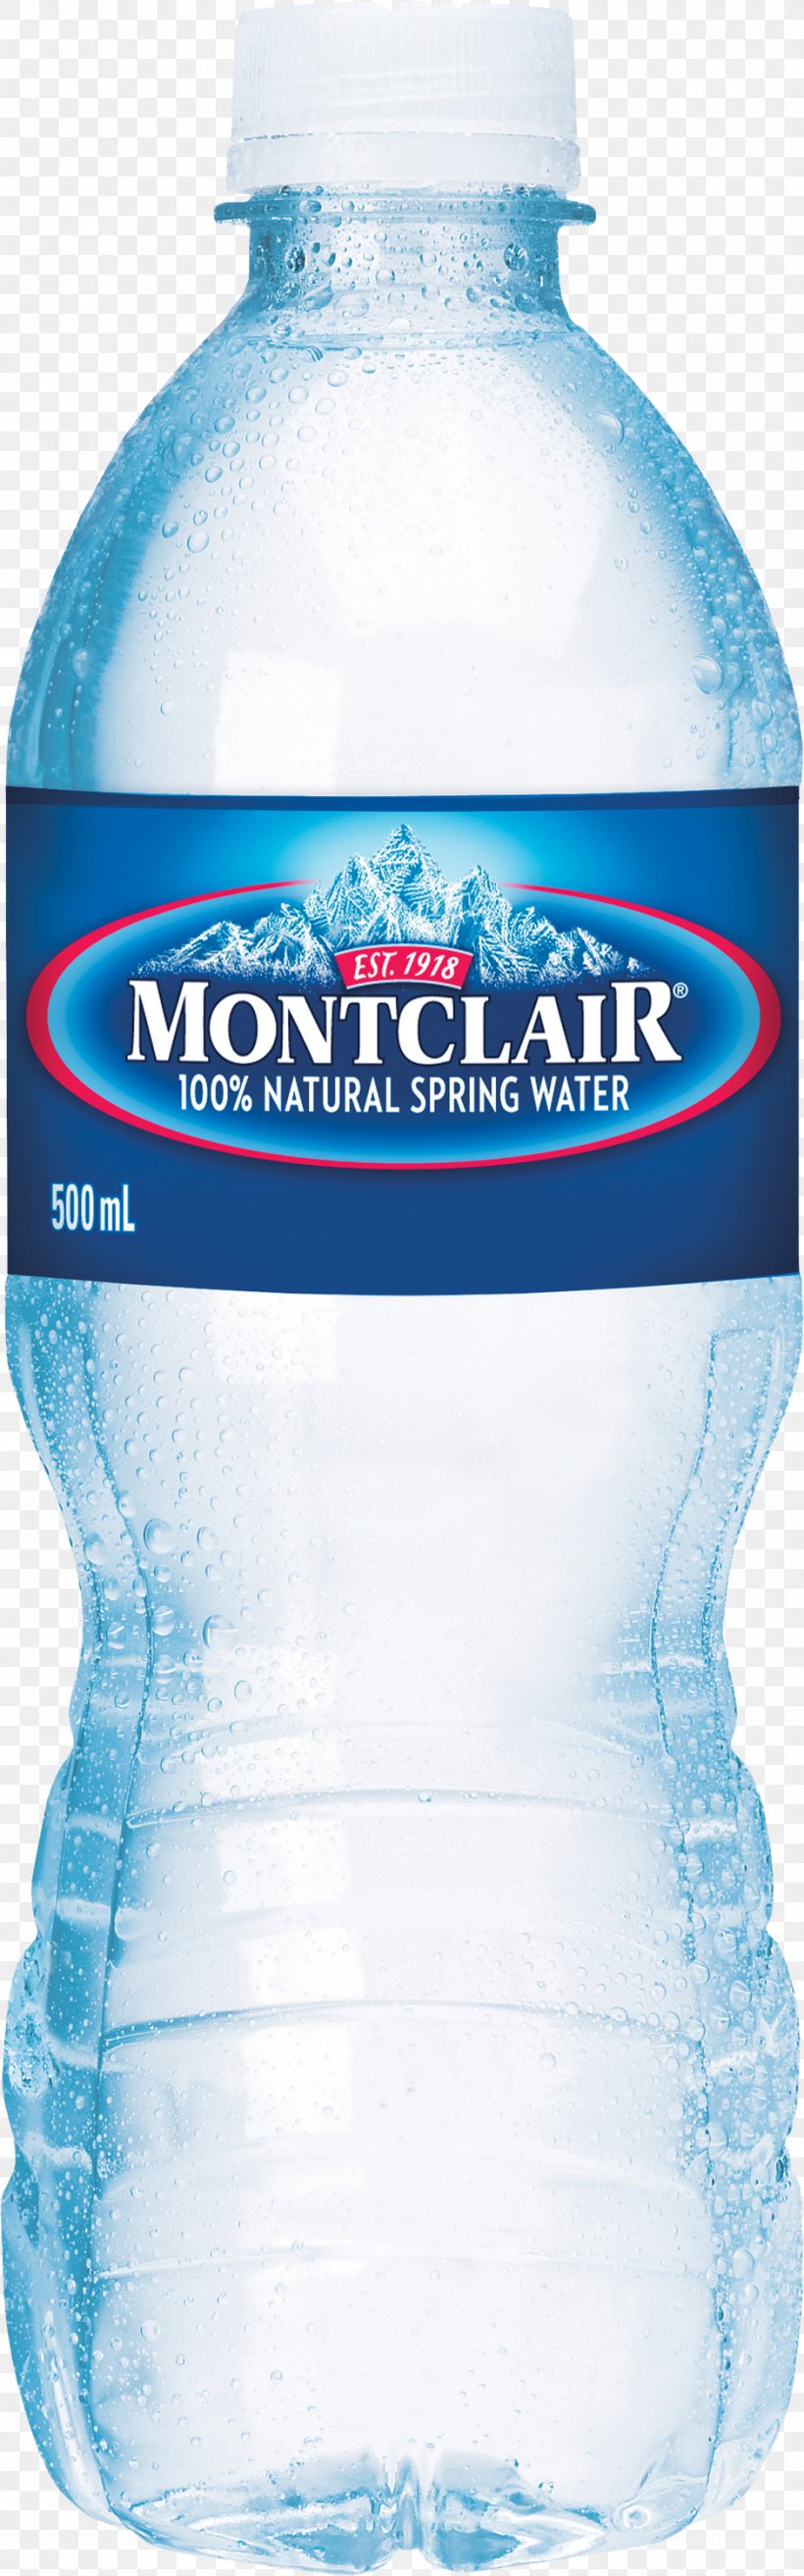 Carbonated Water Mineral Water Bottled Water Brand, PNG, 940x3012px, Carbonated Water, Bottle, Bottled Water, Distilled Water, Drink Download Free